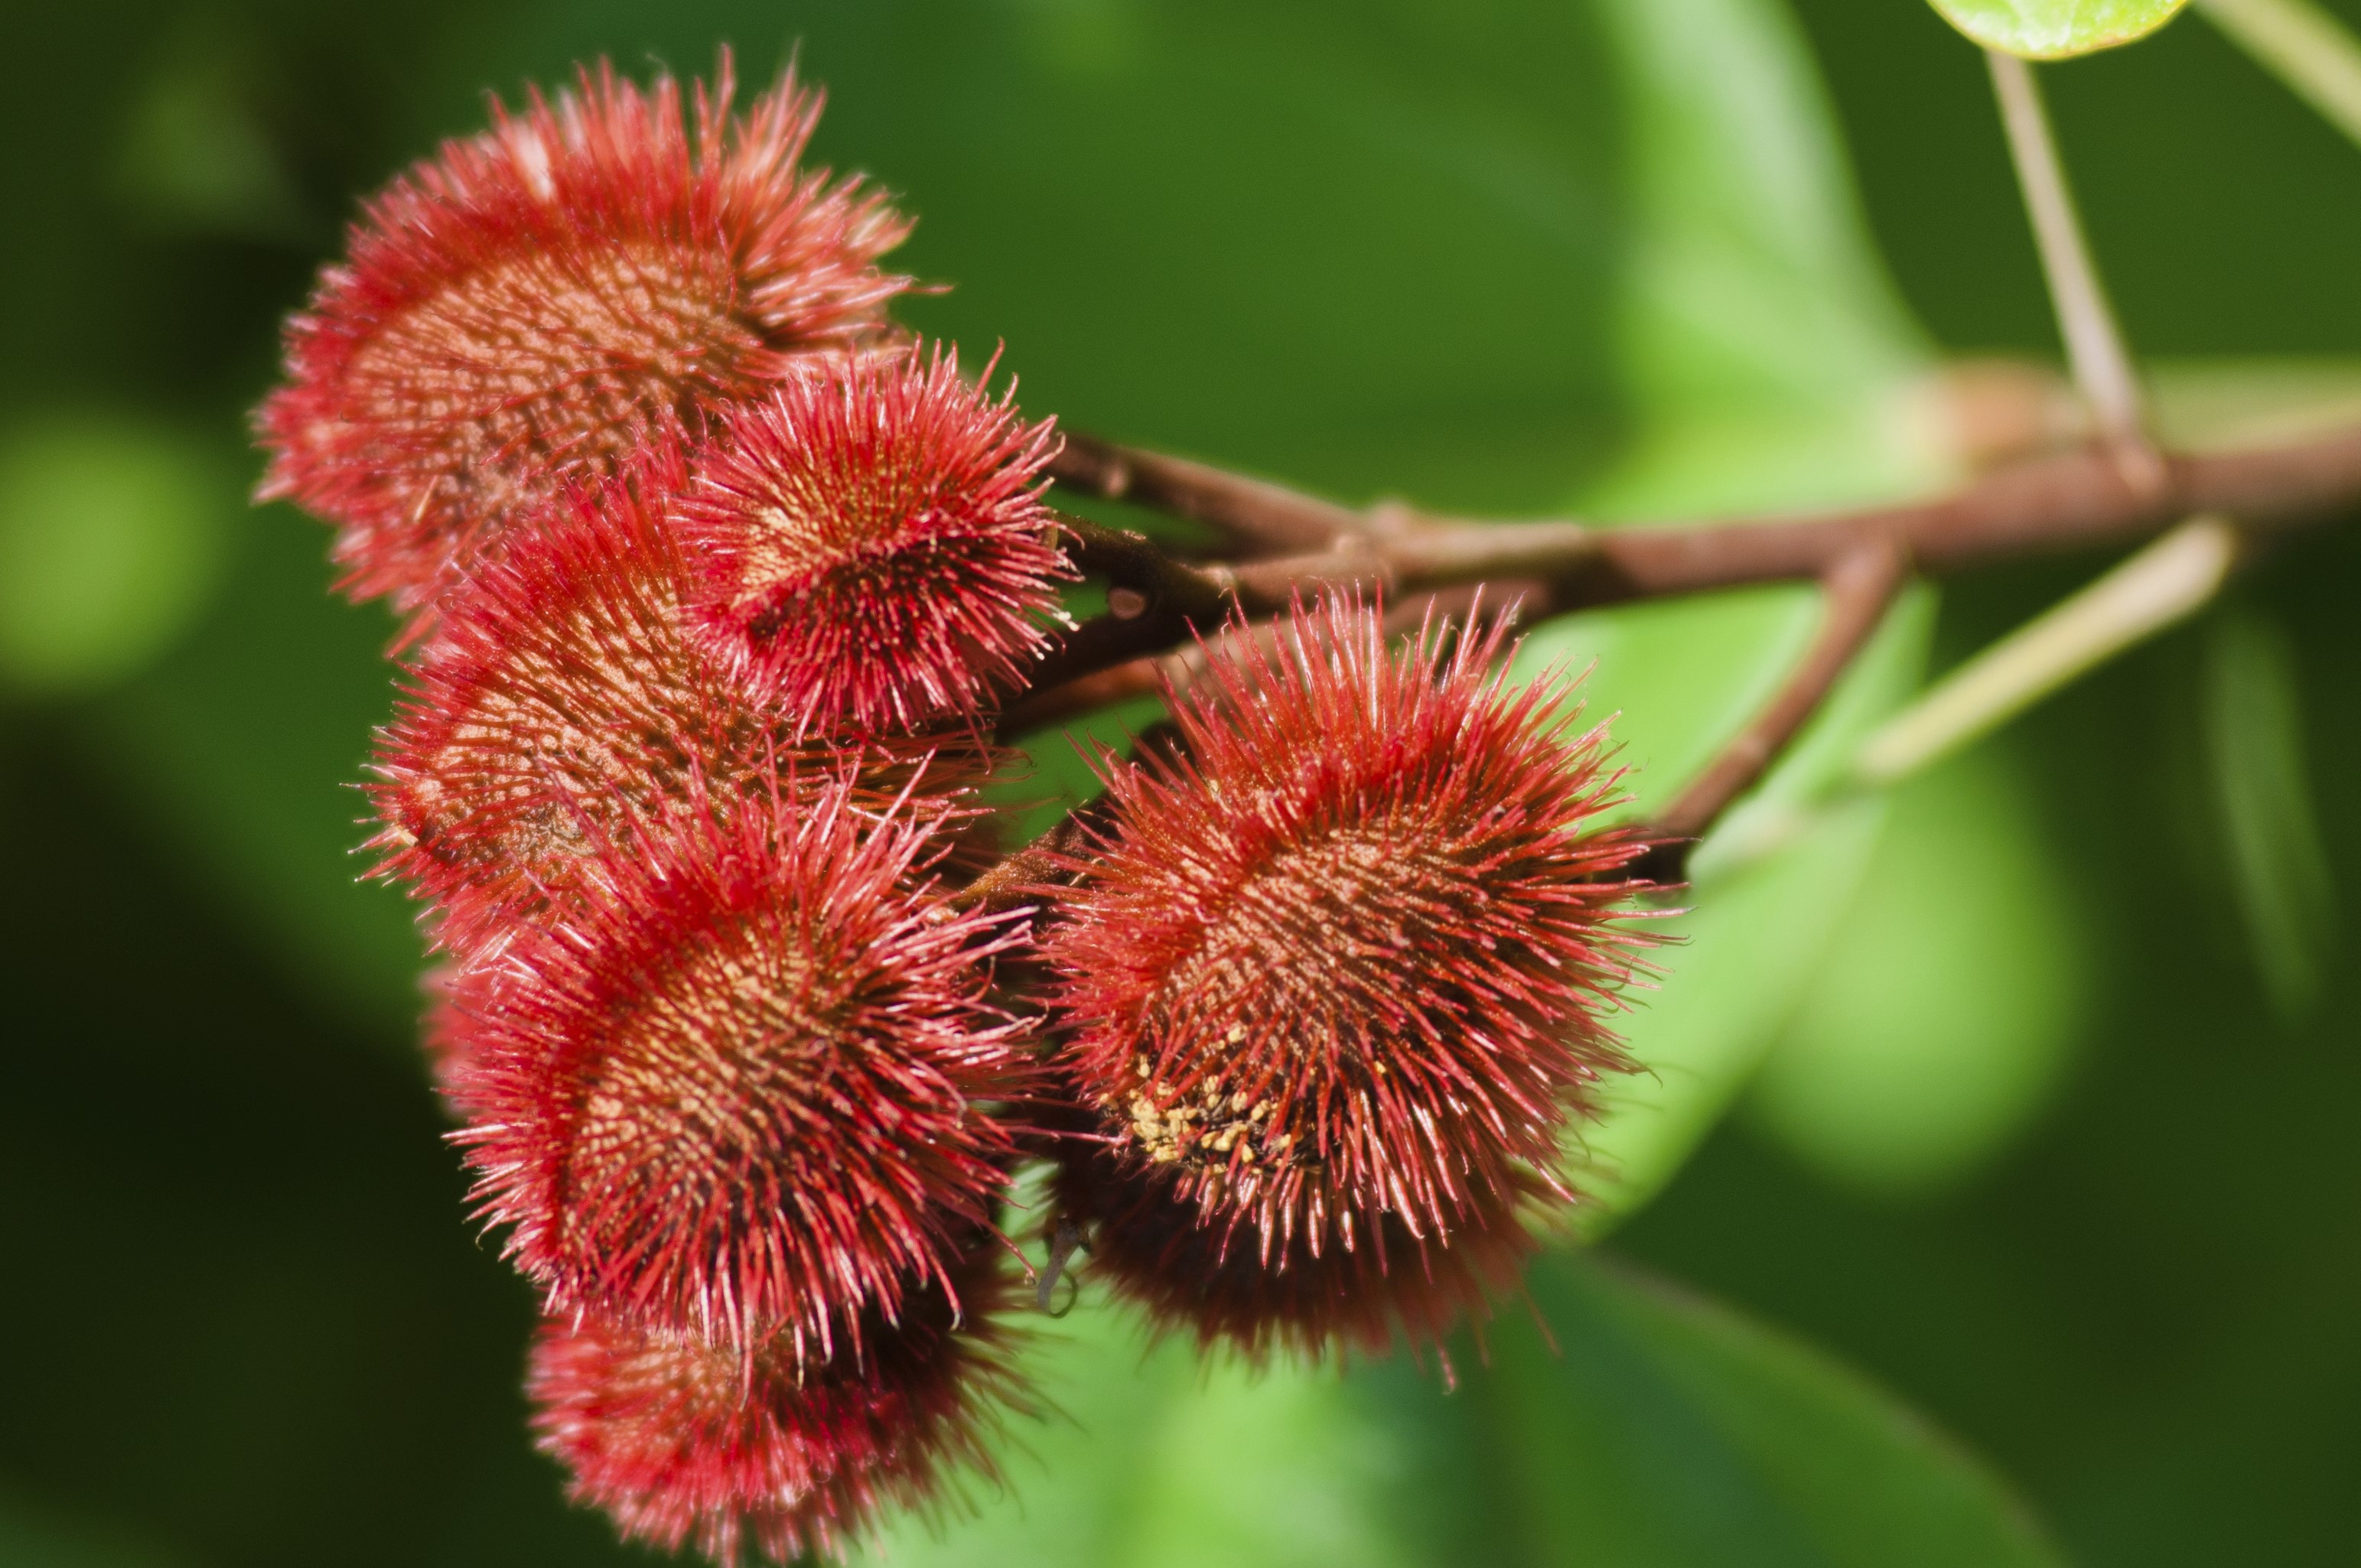 Annatto Seeds Pack A Powerful Punch